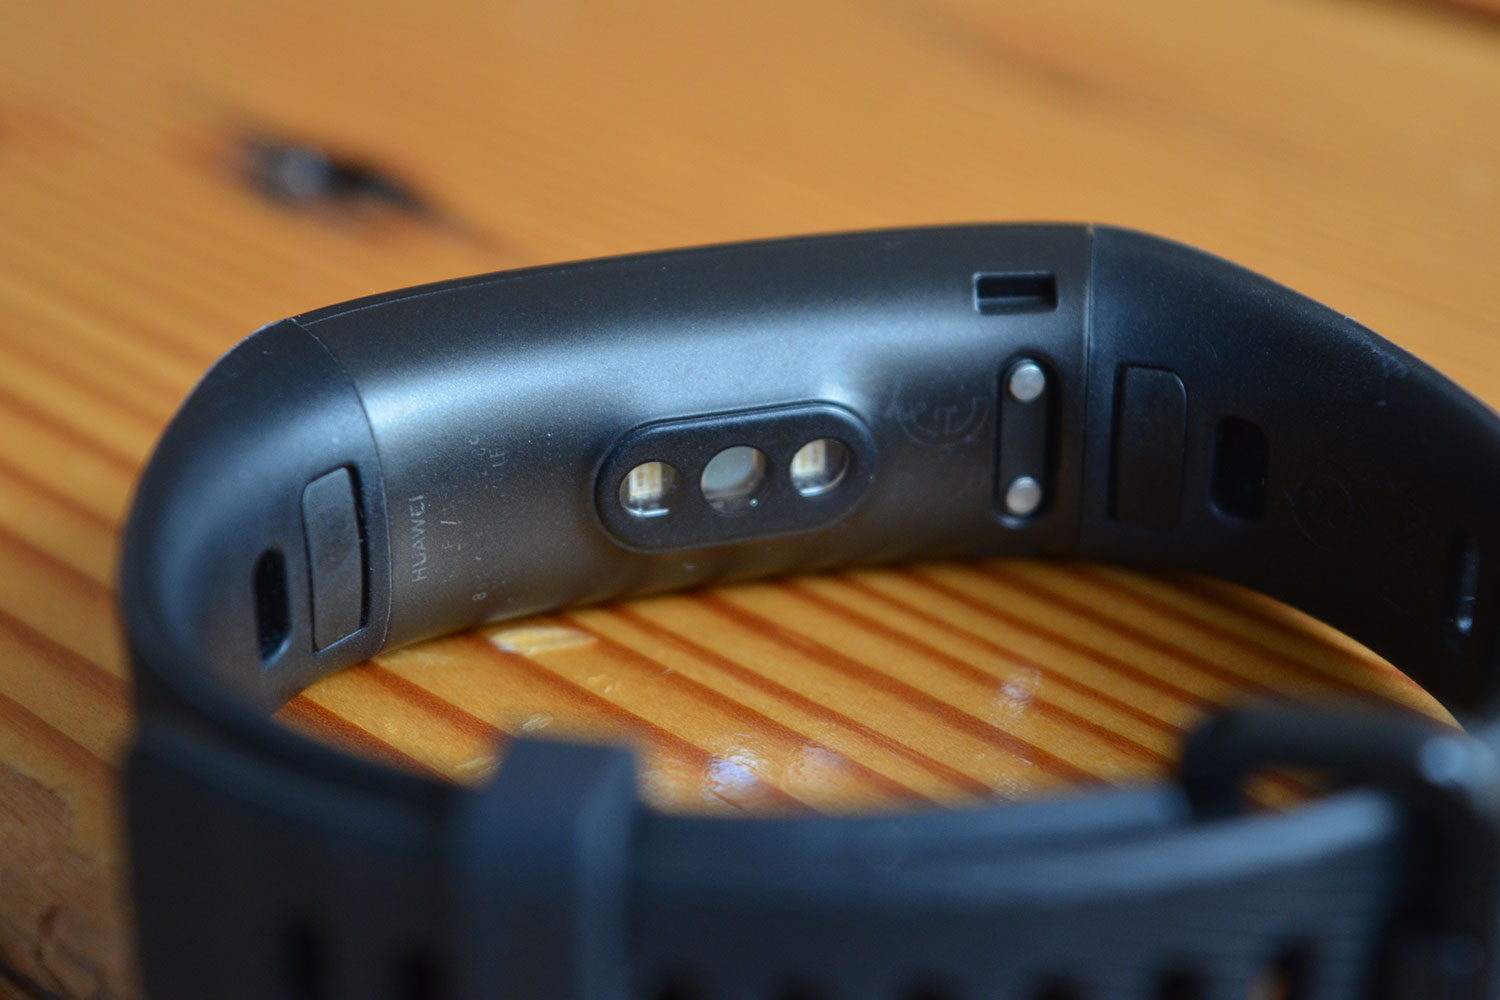 revision huawei band 3 pro review 15